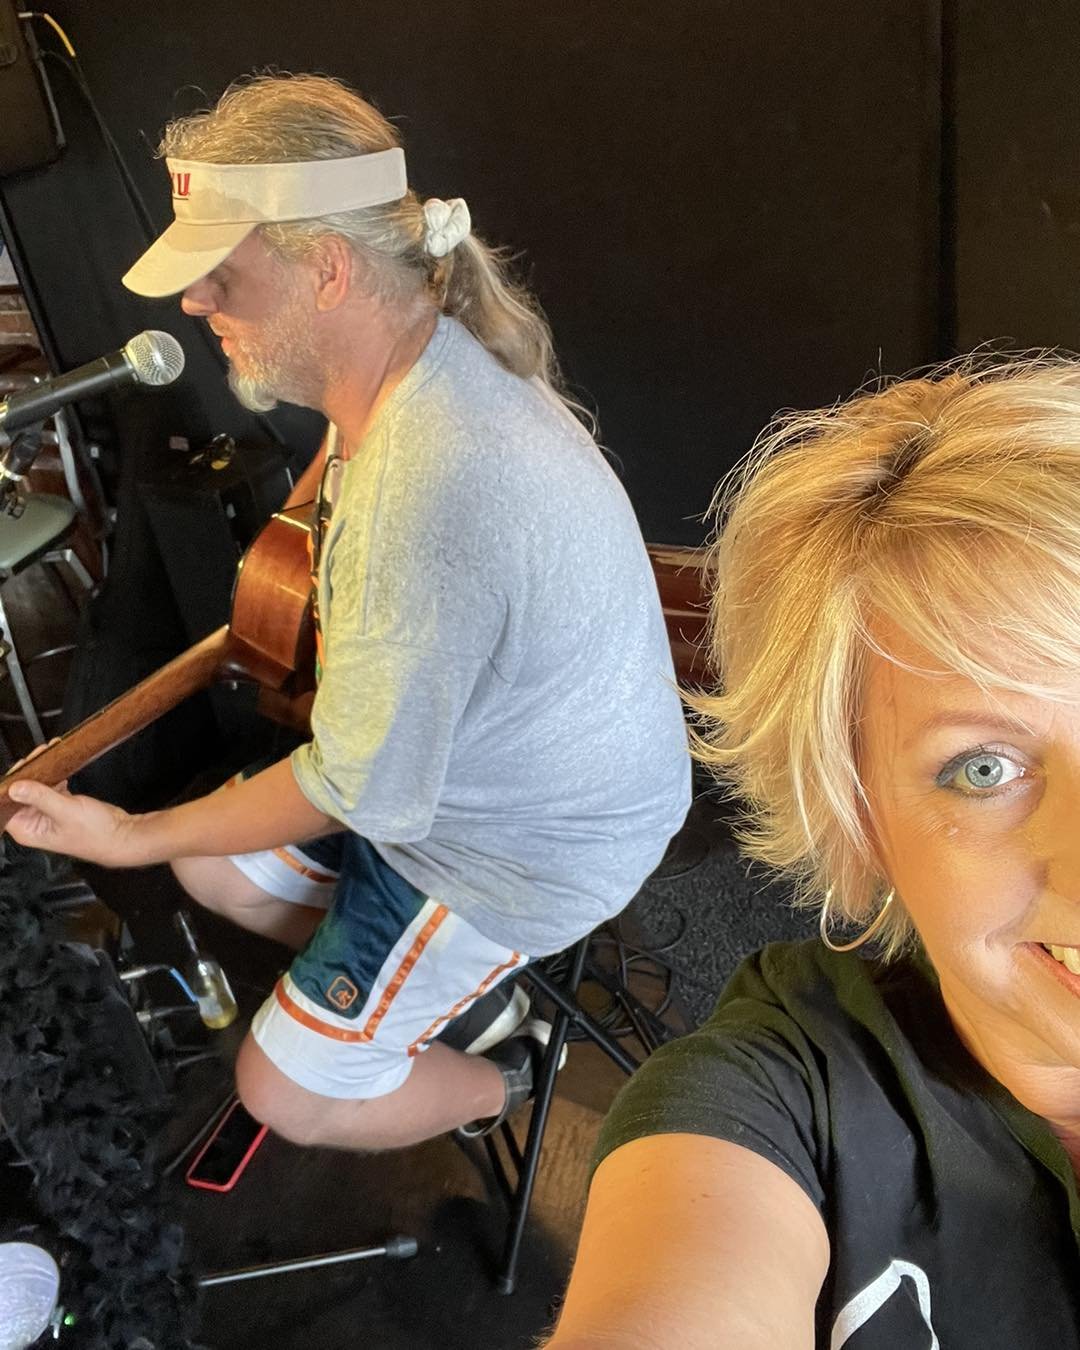 Fun with Dick and Jane Acoustic Show at Boro Bourbon &amp; Brews was a fun time, as always. We love to show our softer side, step outside the box and play music from a variety of genres. Special thanks to our local community of musicians who came out